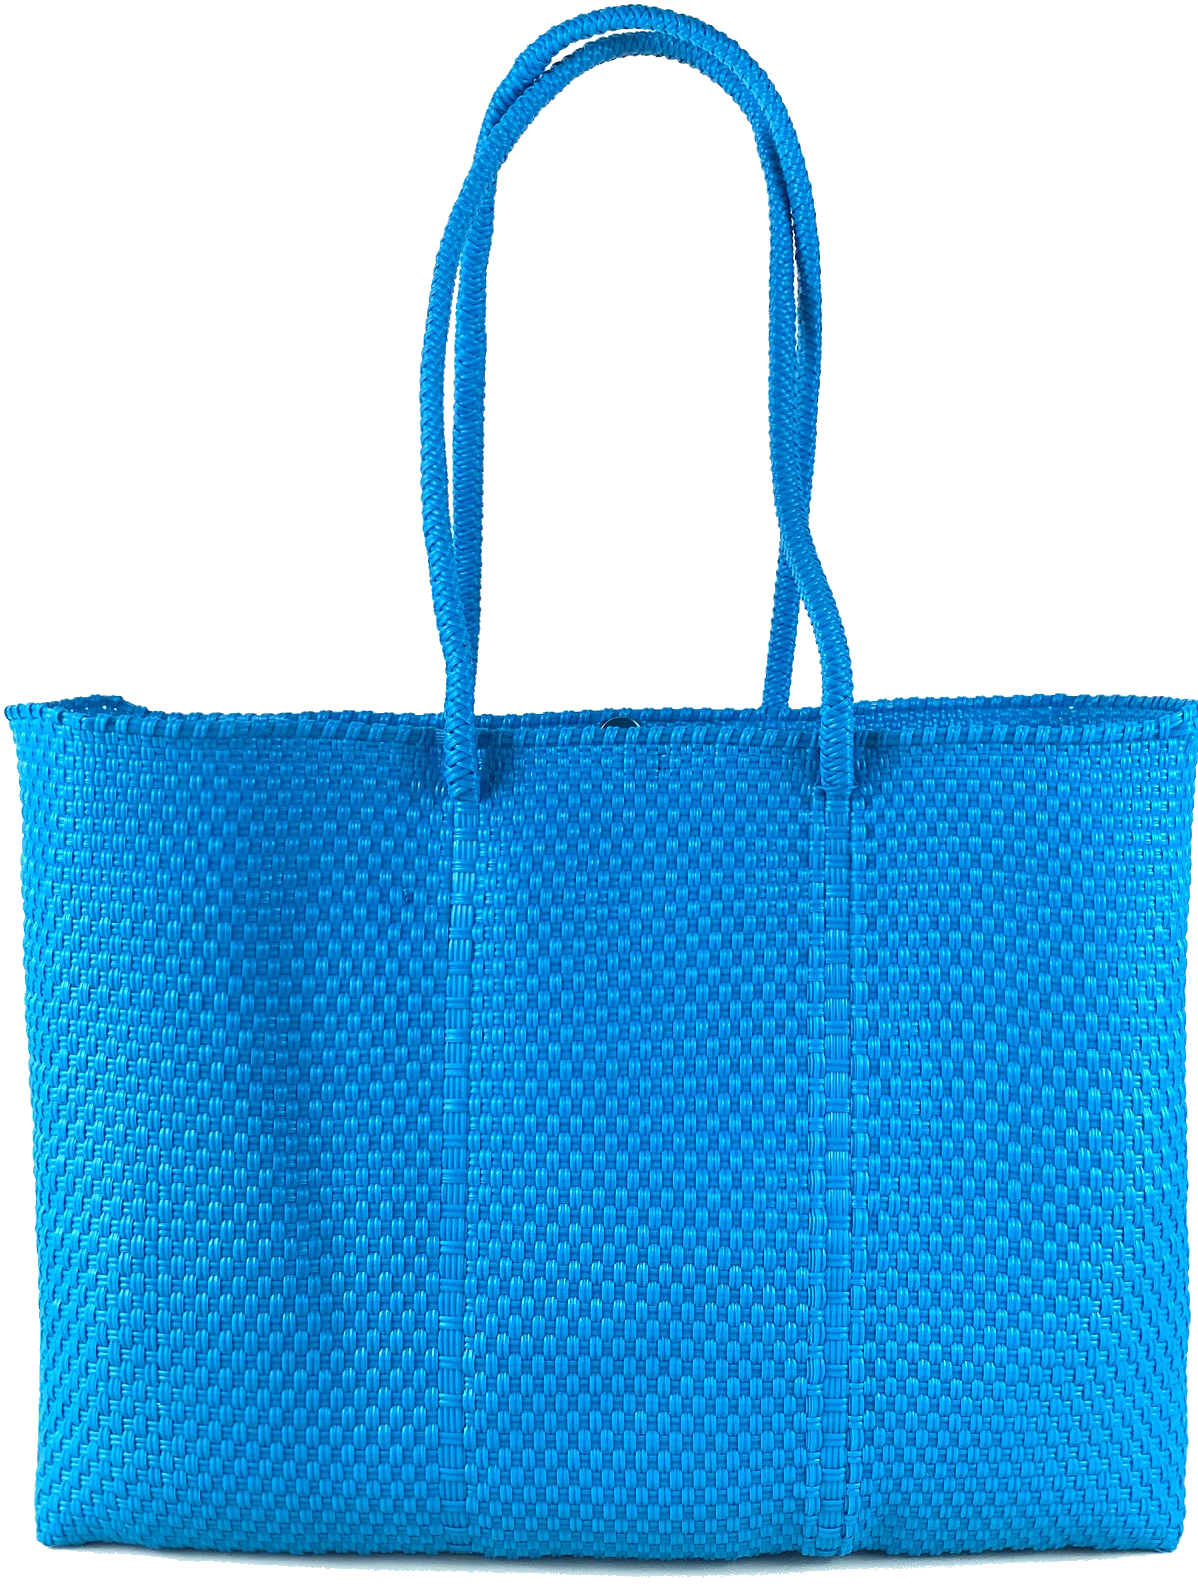 Small Tote - Turquoise